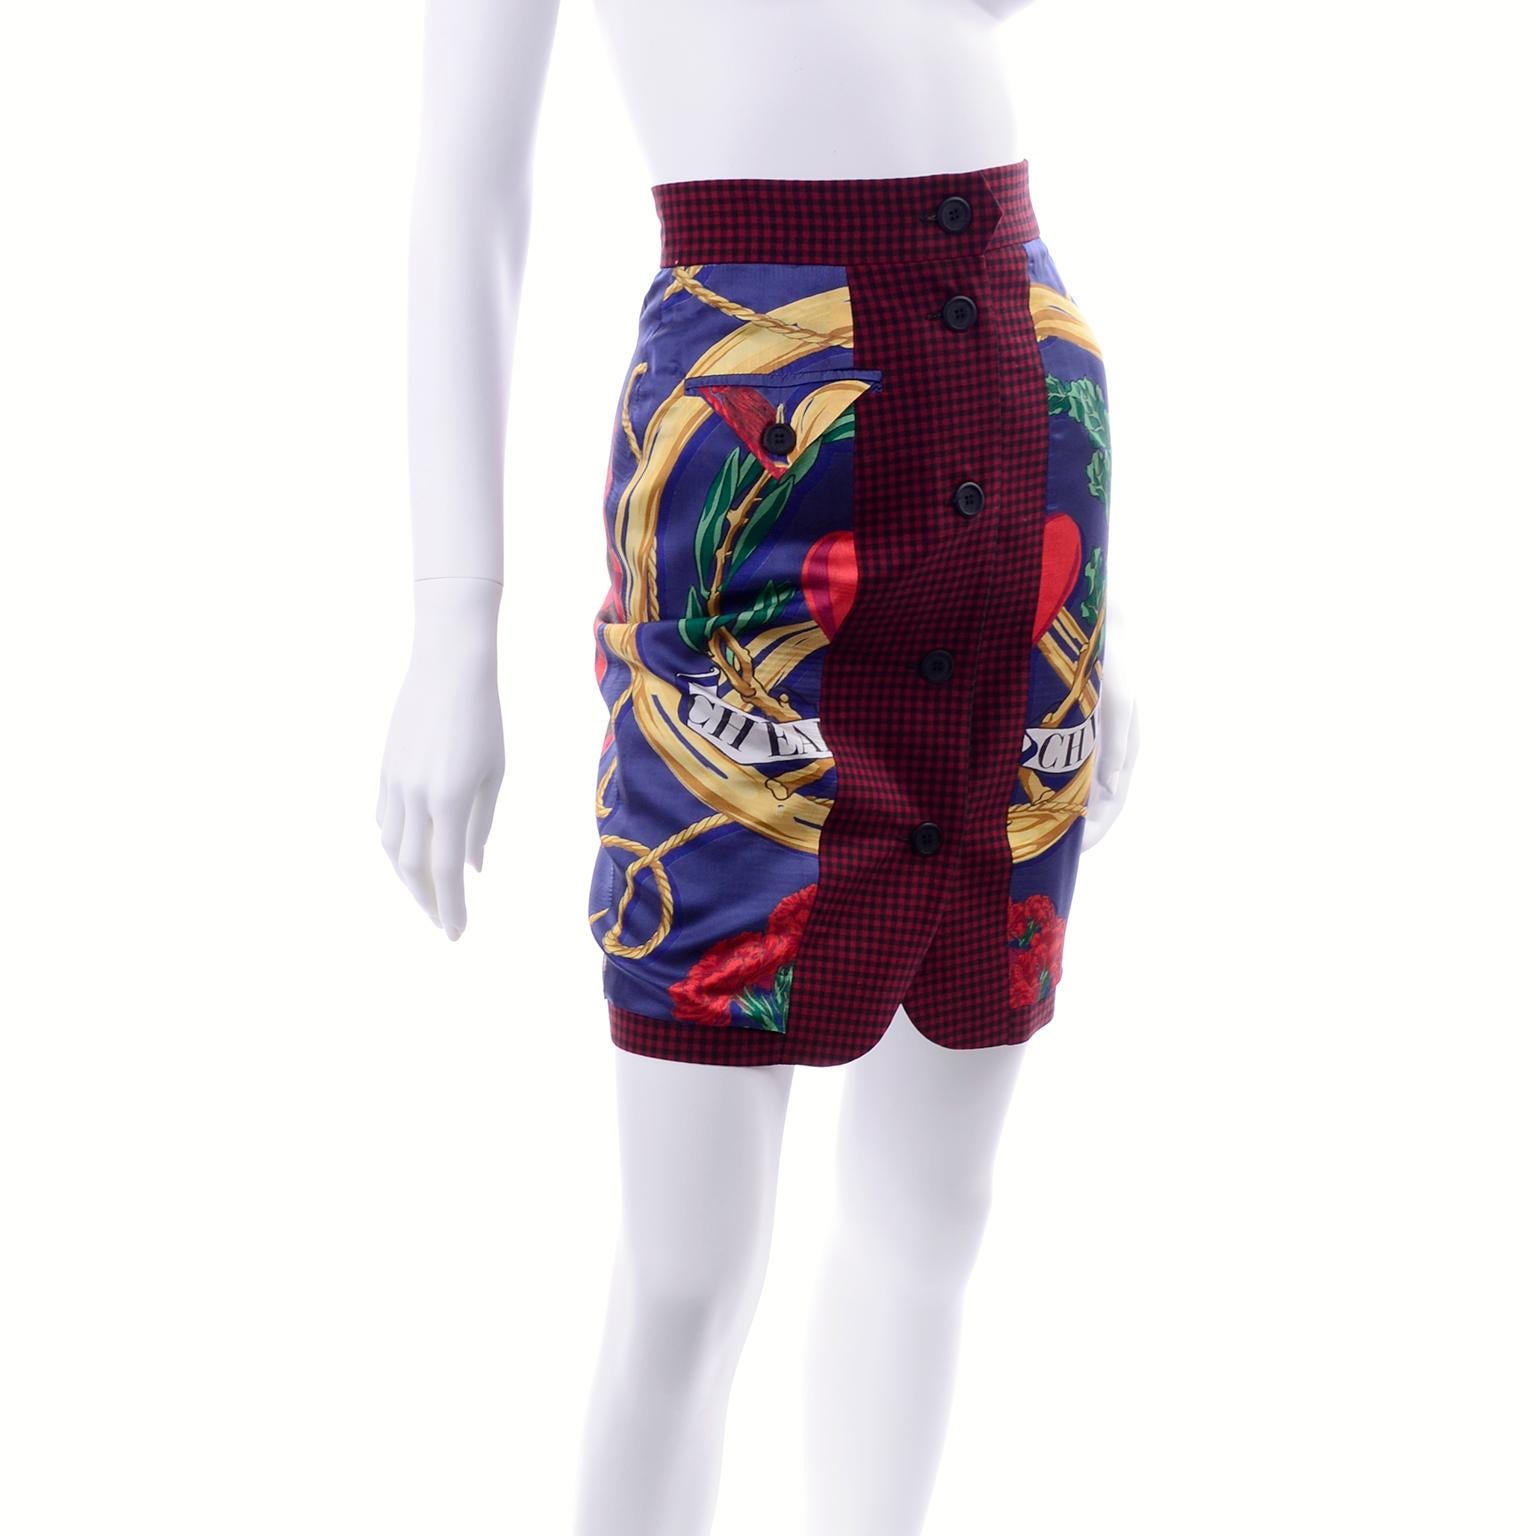 This is a wonderful vintage Moschino Pret a Porter skirt designed by Franco Moschino in the early 1990's. The fabric is 100% wool in a navy nautical print with red carnations, green vines, pink/red fans, and red and black plaid.  The skirt is lined